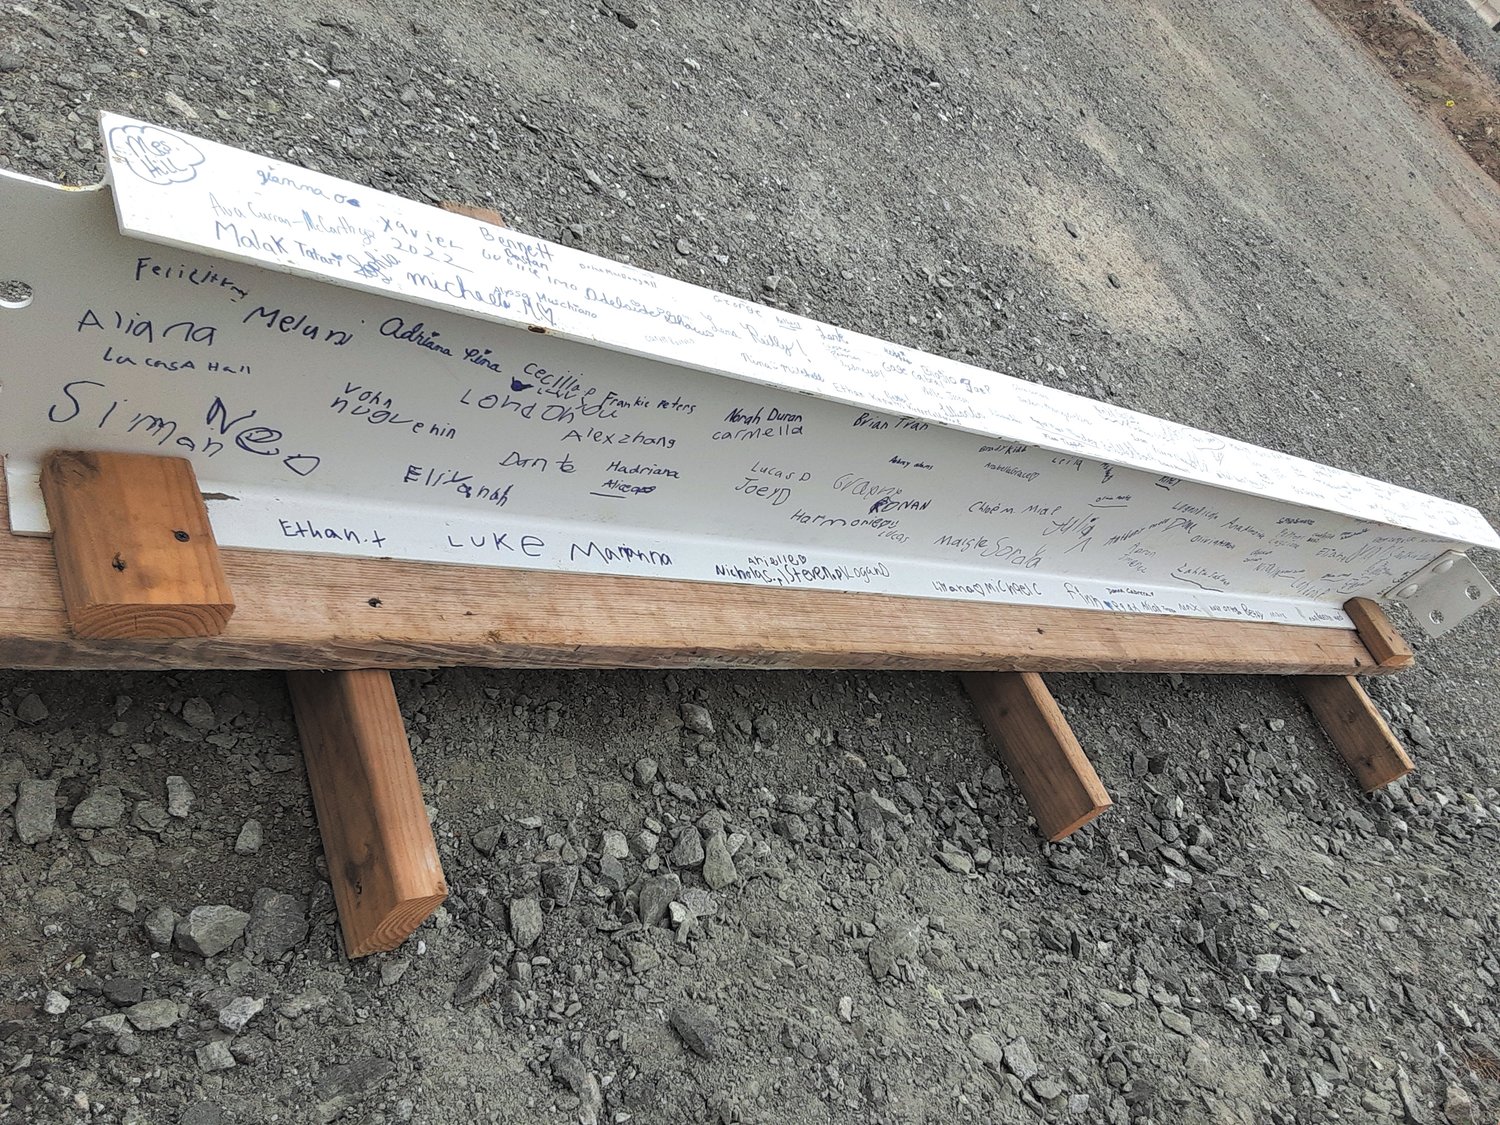 READY FOR CONSTRUCTION: The finished steel beam will be installed into the school between the main building and the gymnasium. Because the beams were painted white, they will stand out from the rest of the structure until the walls go up. (Photo courtesy of Cranston Public Schools)